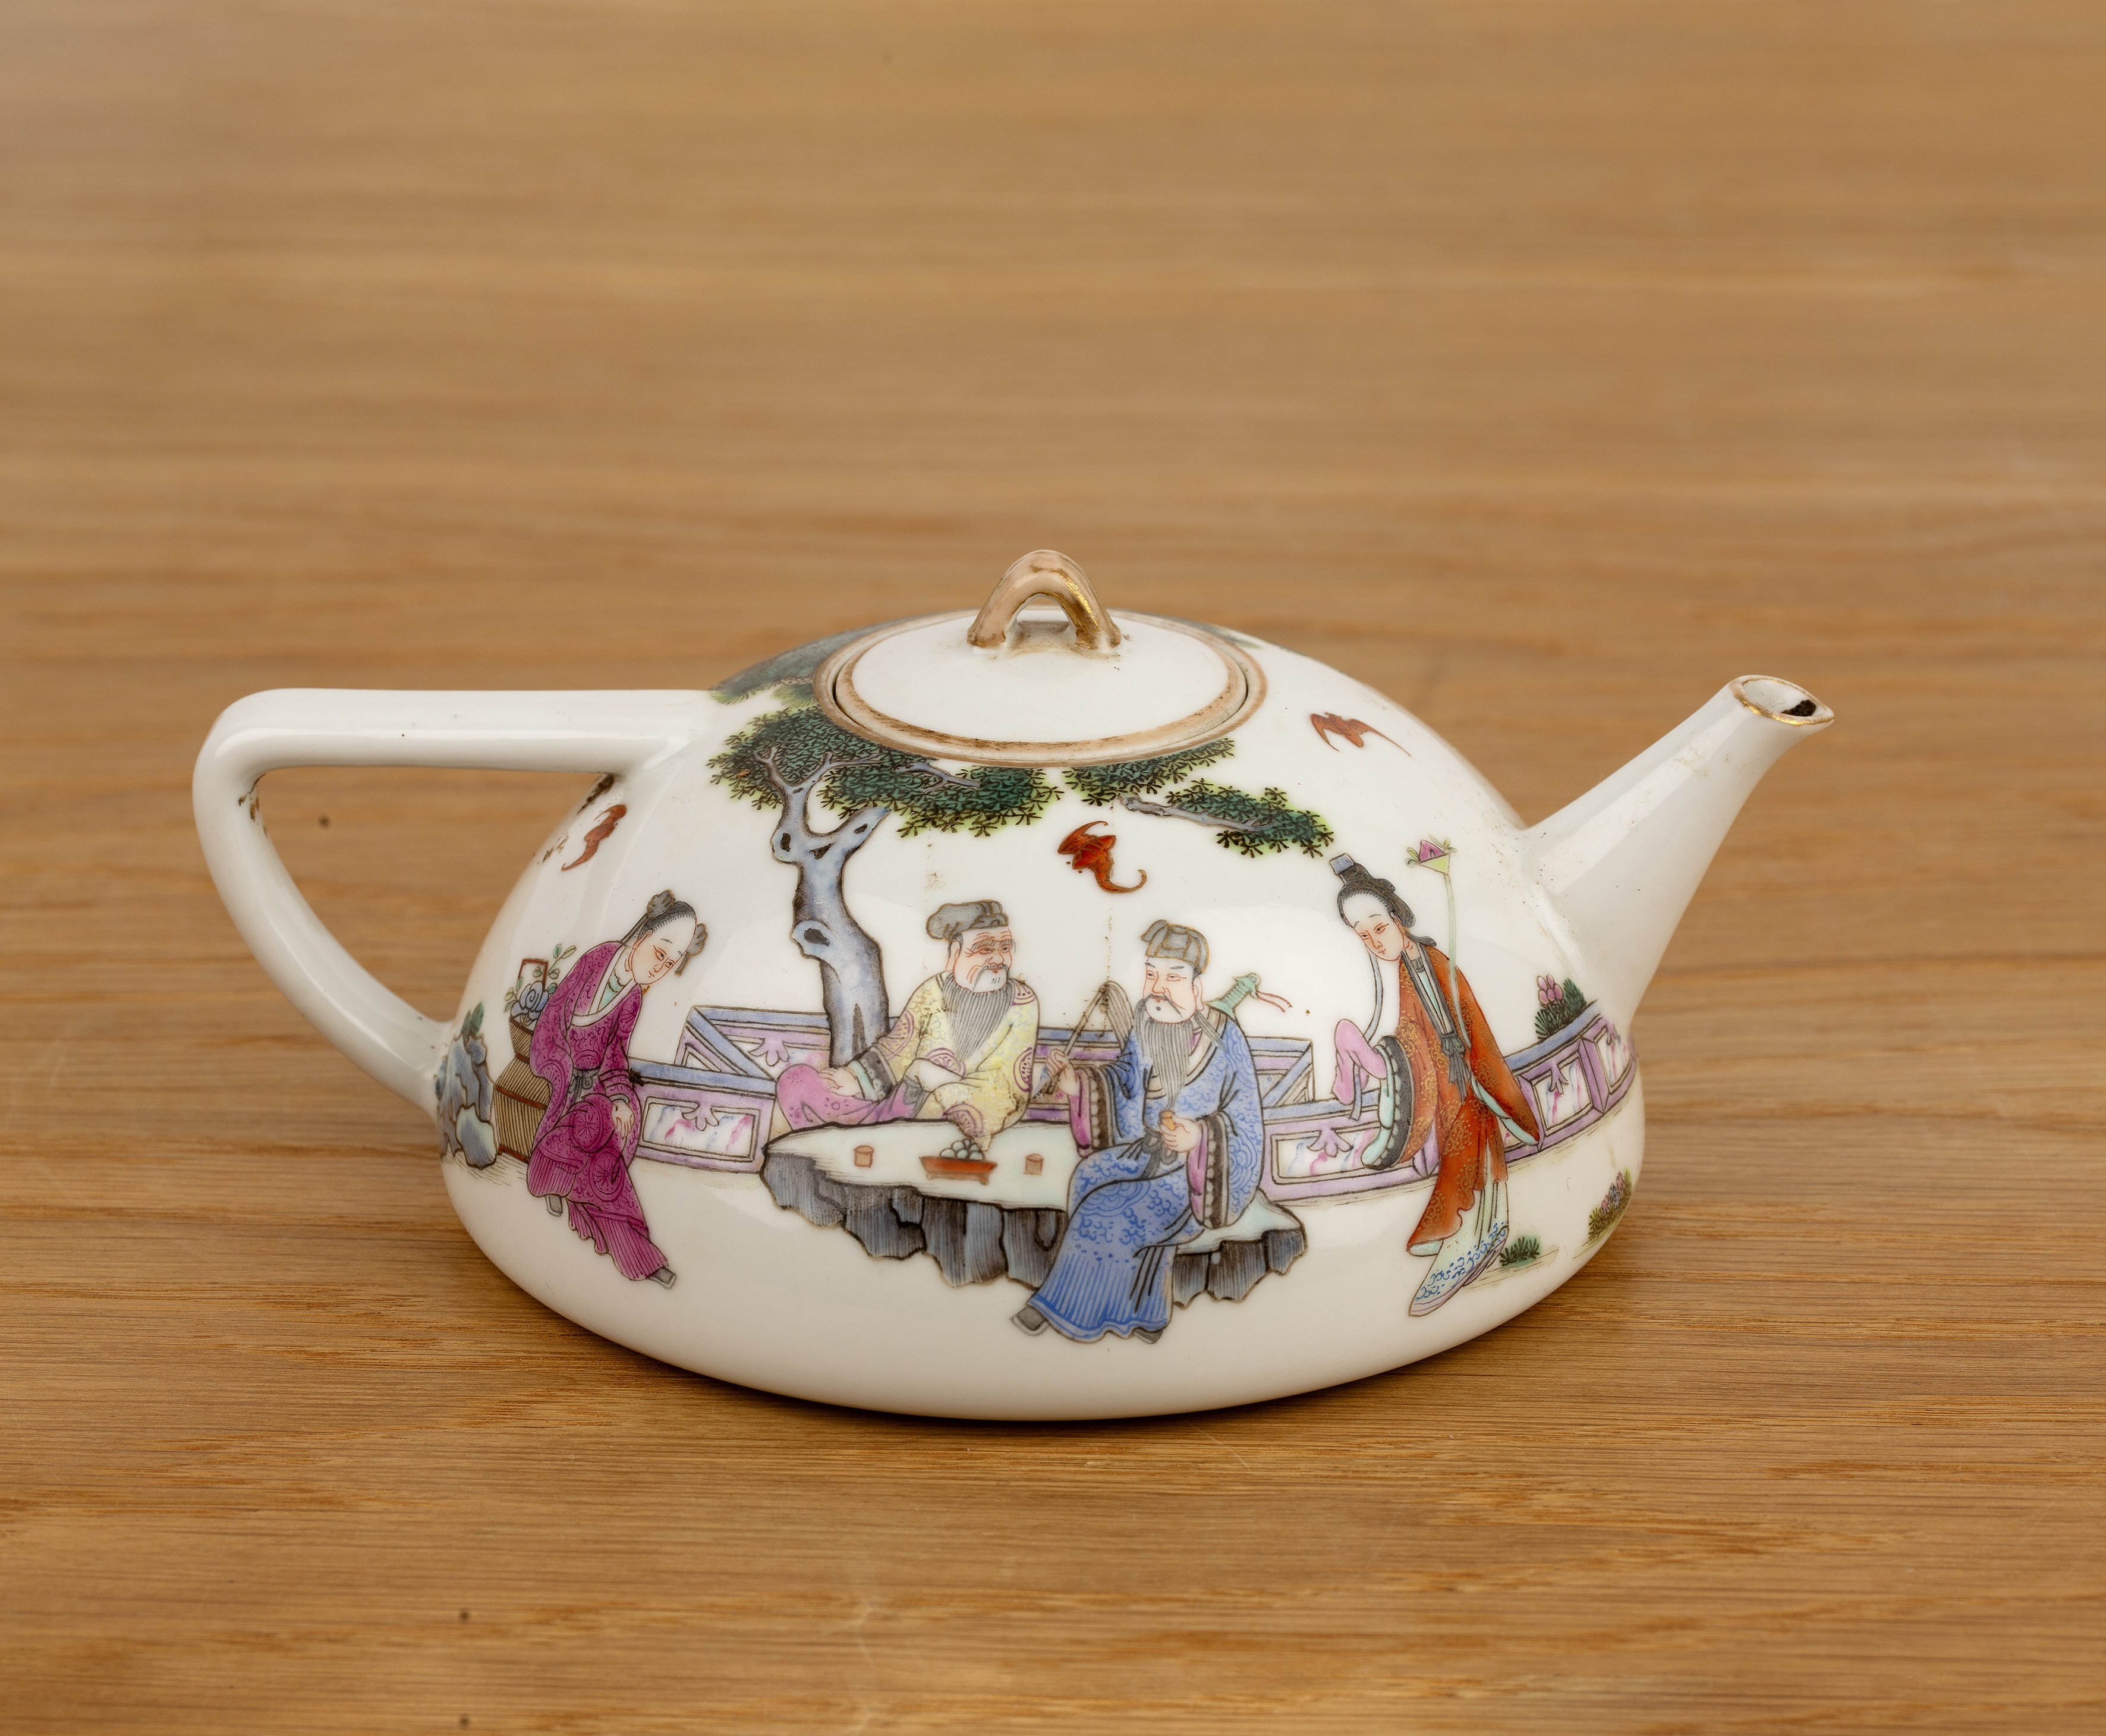 Famille rose flat porcelain teapot Chinese, 19th Century painted in polychrome enamels with scholars - Image 2 of 8